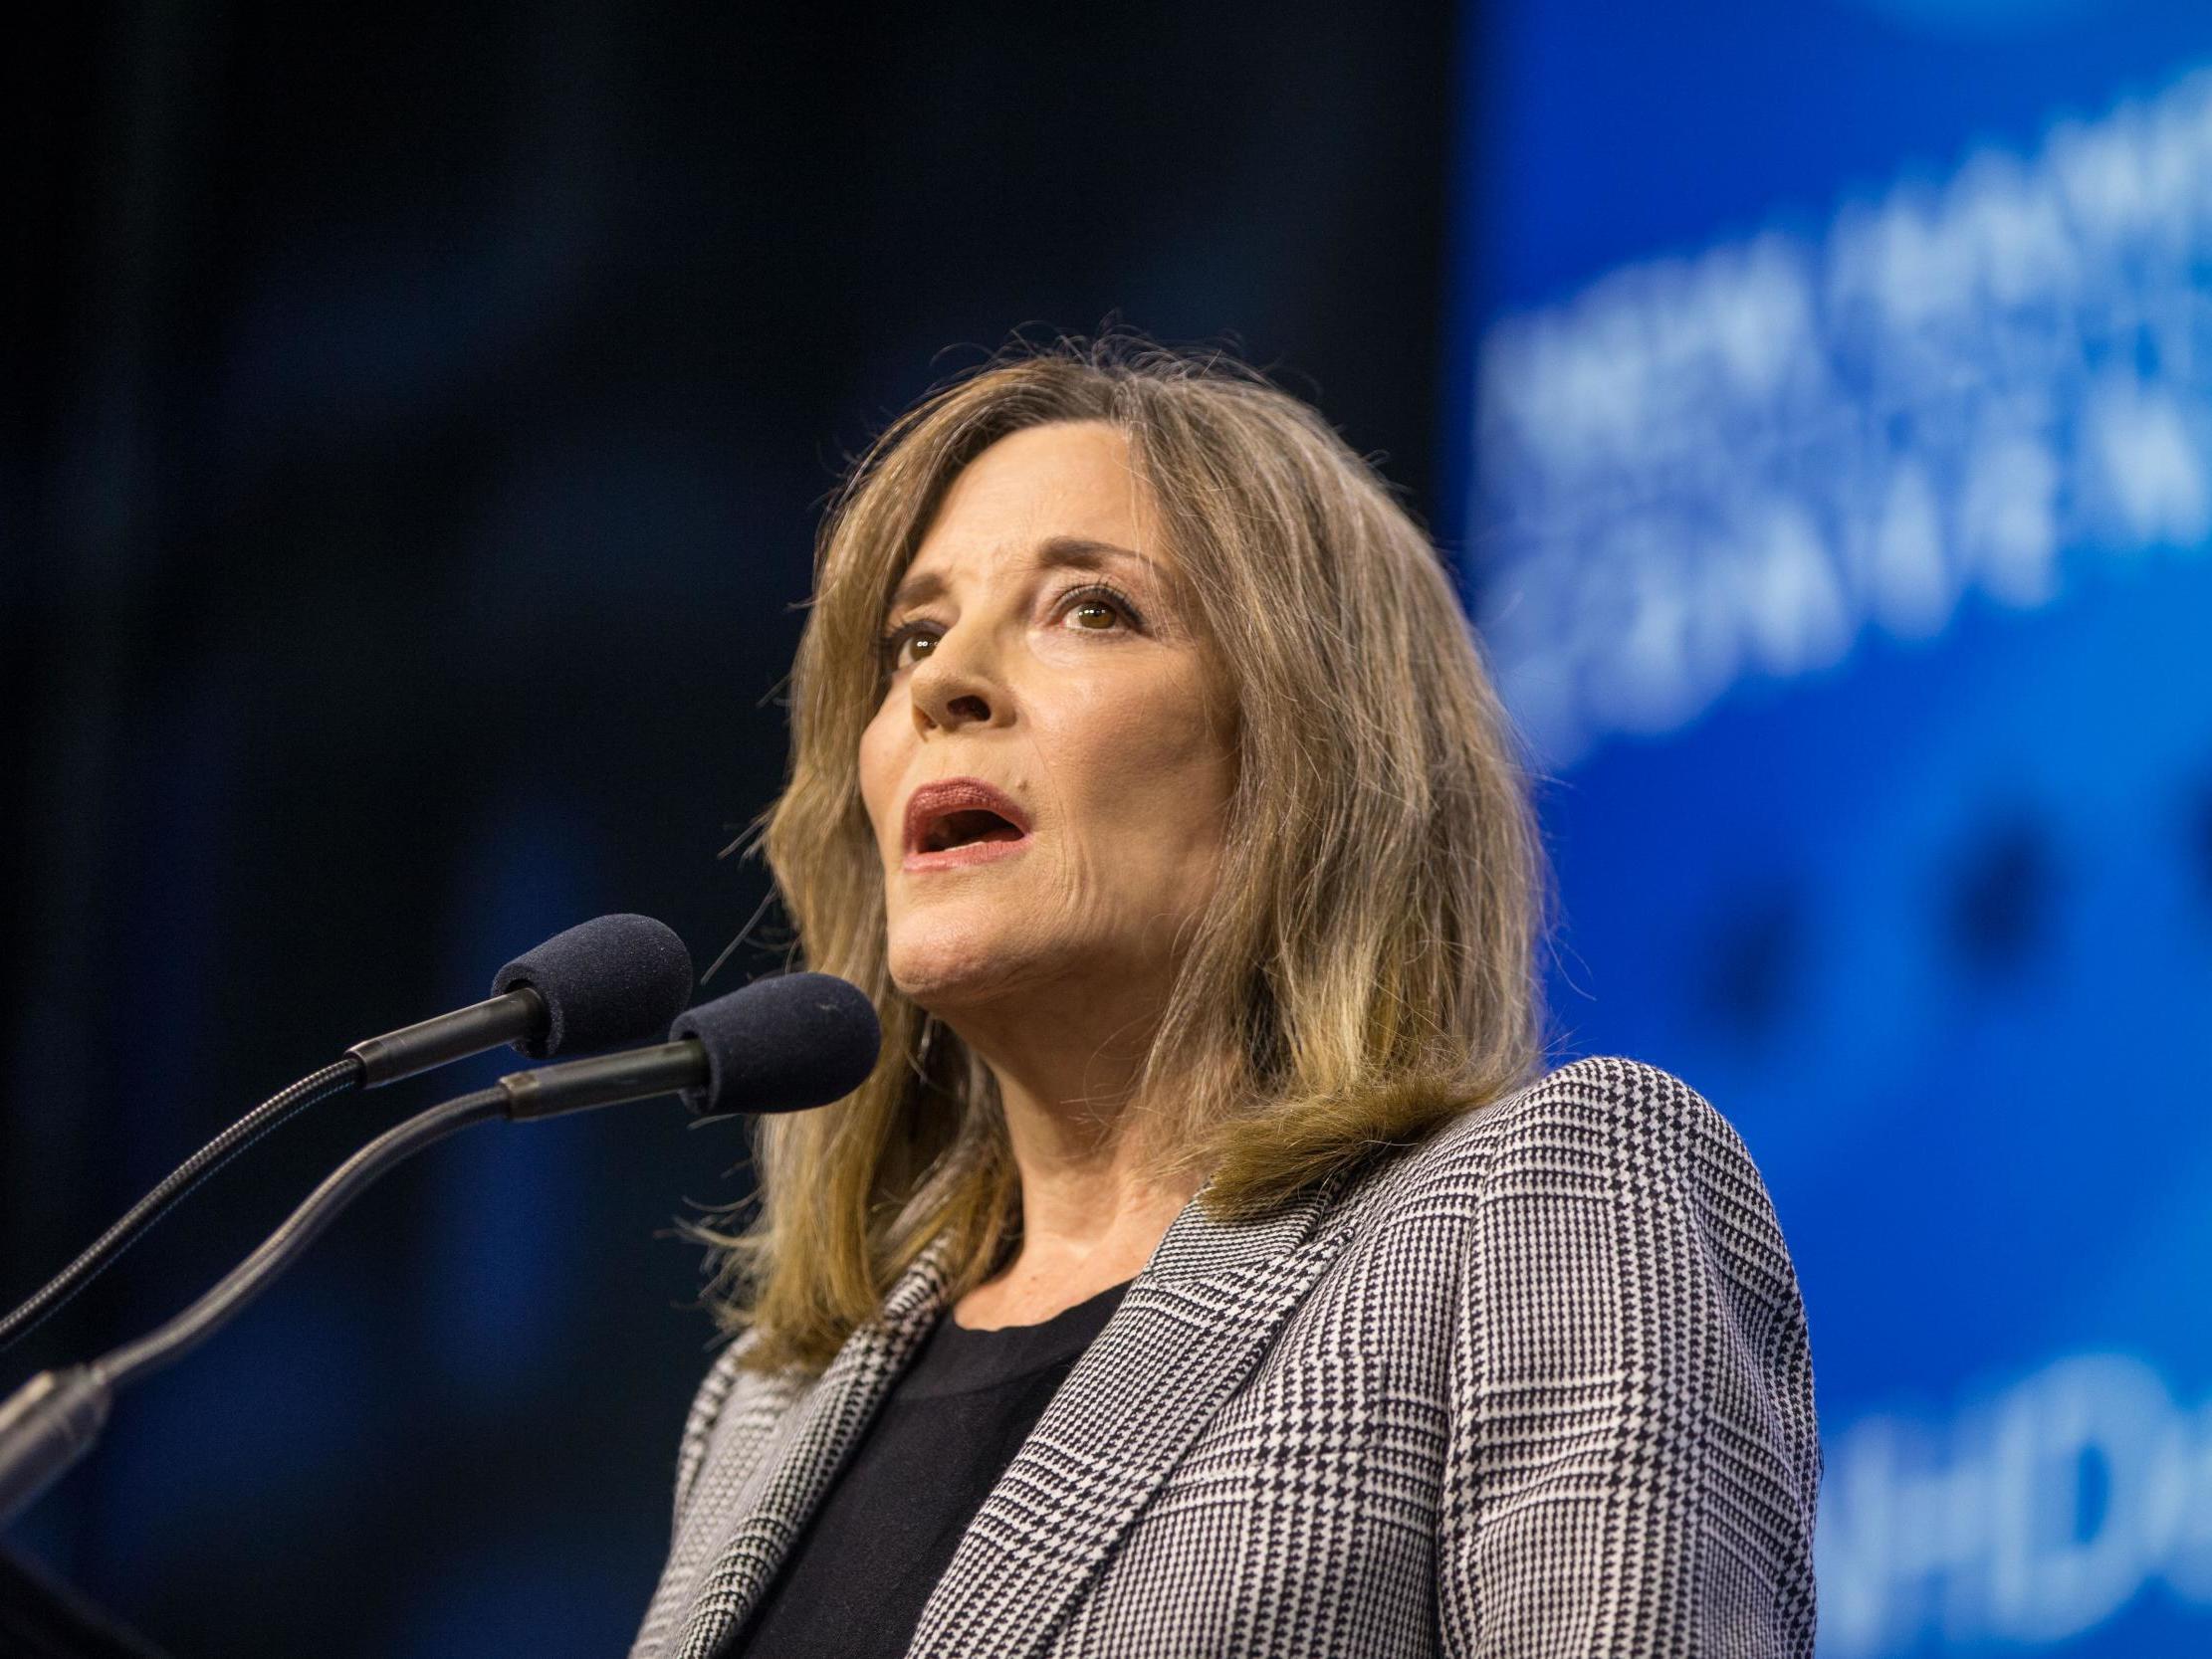 Marianne Williamson appeared to confirm reports she had let go her entire staff